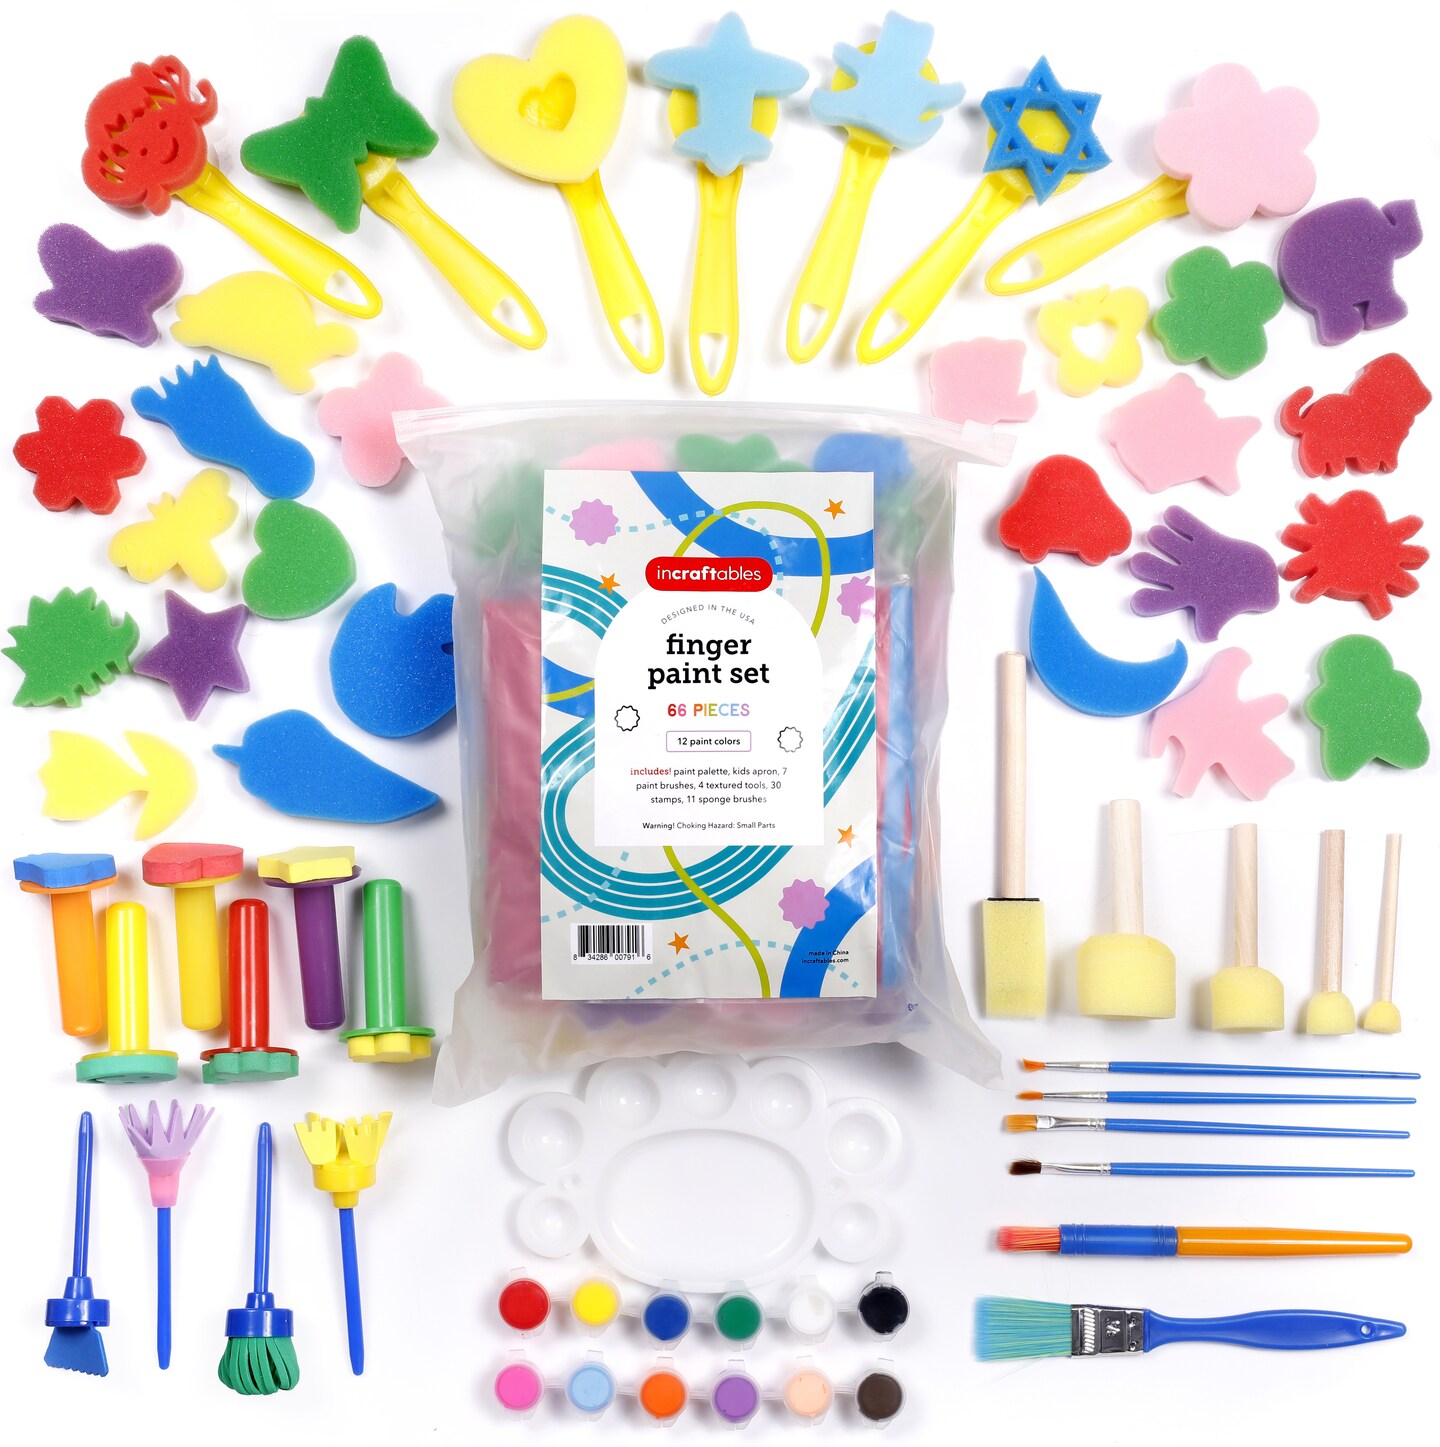  Finger Paint Kit,12 Colors Washable Funny Finger Painting Kit  whit Book,DIY Crafts Painting,Colorful and Easy Clean Up (12 Colors) :  Arts, Crafts & Sewing